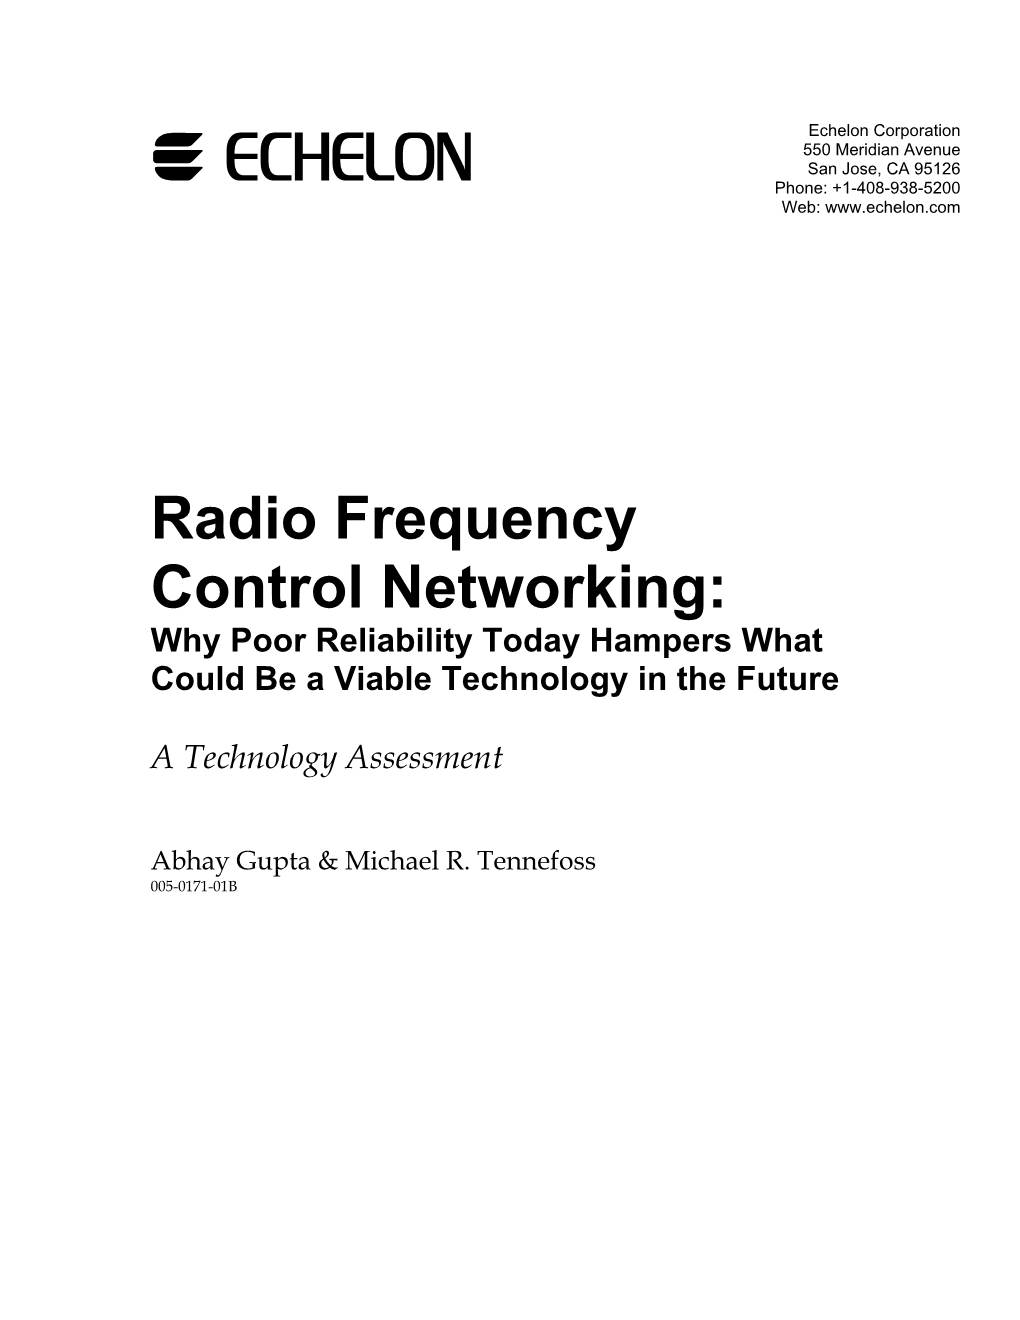 Radio Frequency Control Networking: Why Poor Reliability Today Hampers What Could Be a Viable Technology in the Future